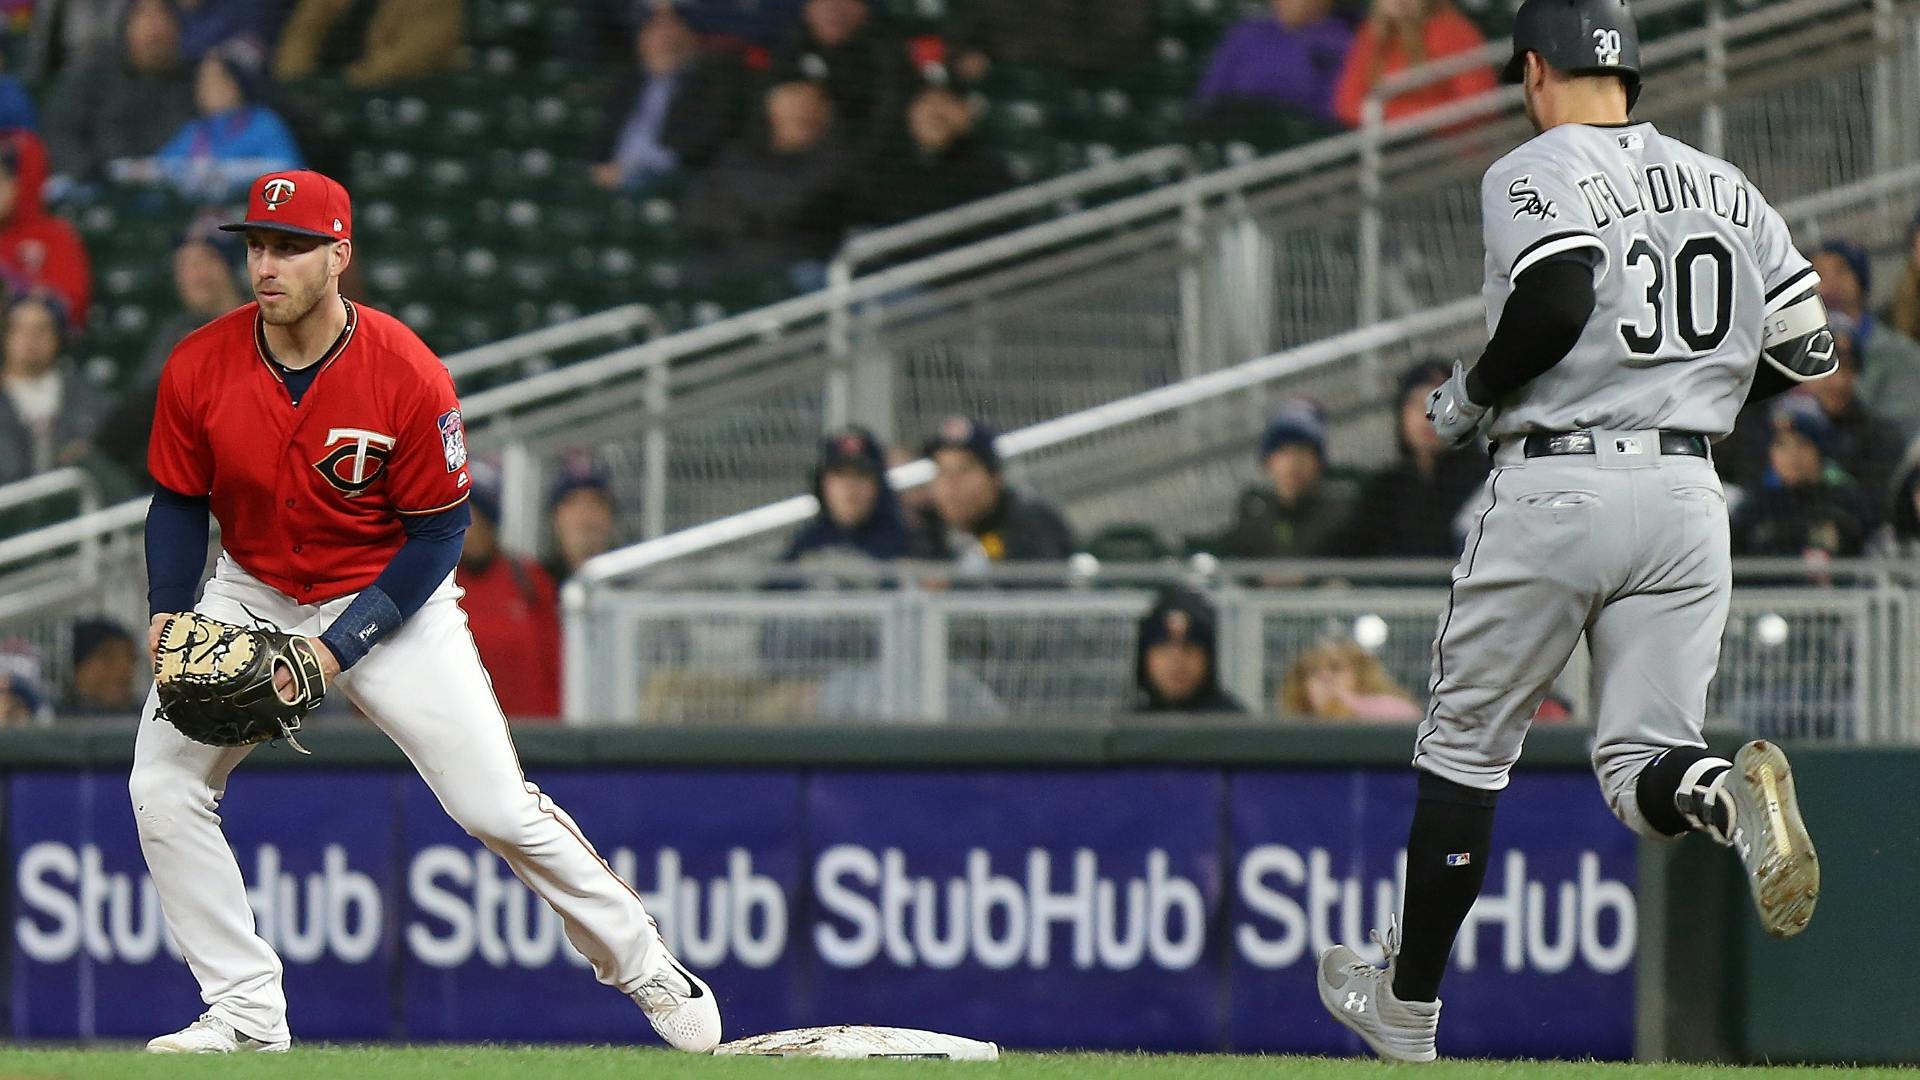 Twins catcher Mitch Garver says returning to action Friday after missing three weeks with a concussion gave him peace of mind — and six RBIs, too.